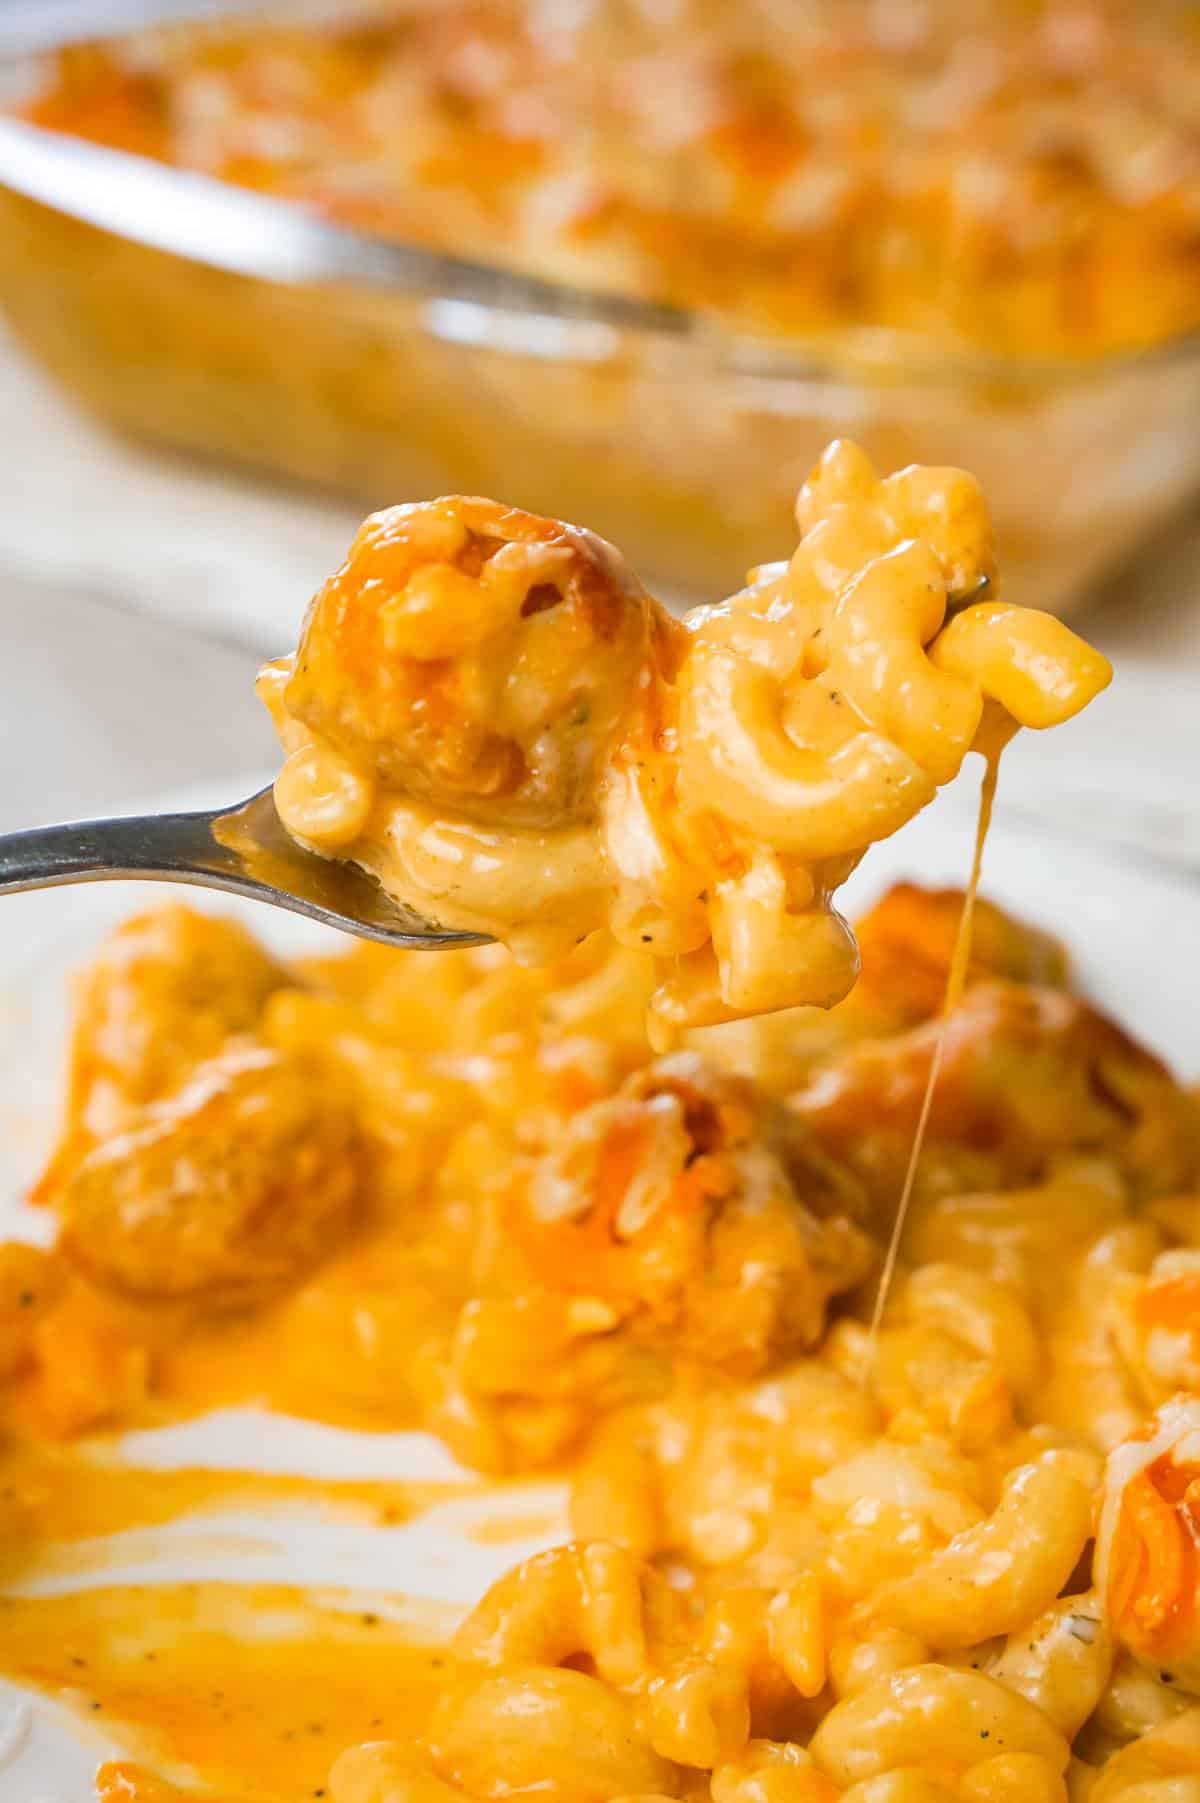 Buffalo Chicken Mac and Cheese is a baked pasta recipe loaded with crispy popcorn chicken, Buffalo sauce, ranch dressing, cheddar and mozzarella cheese.